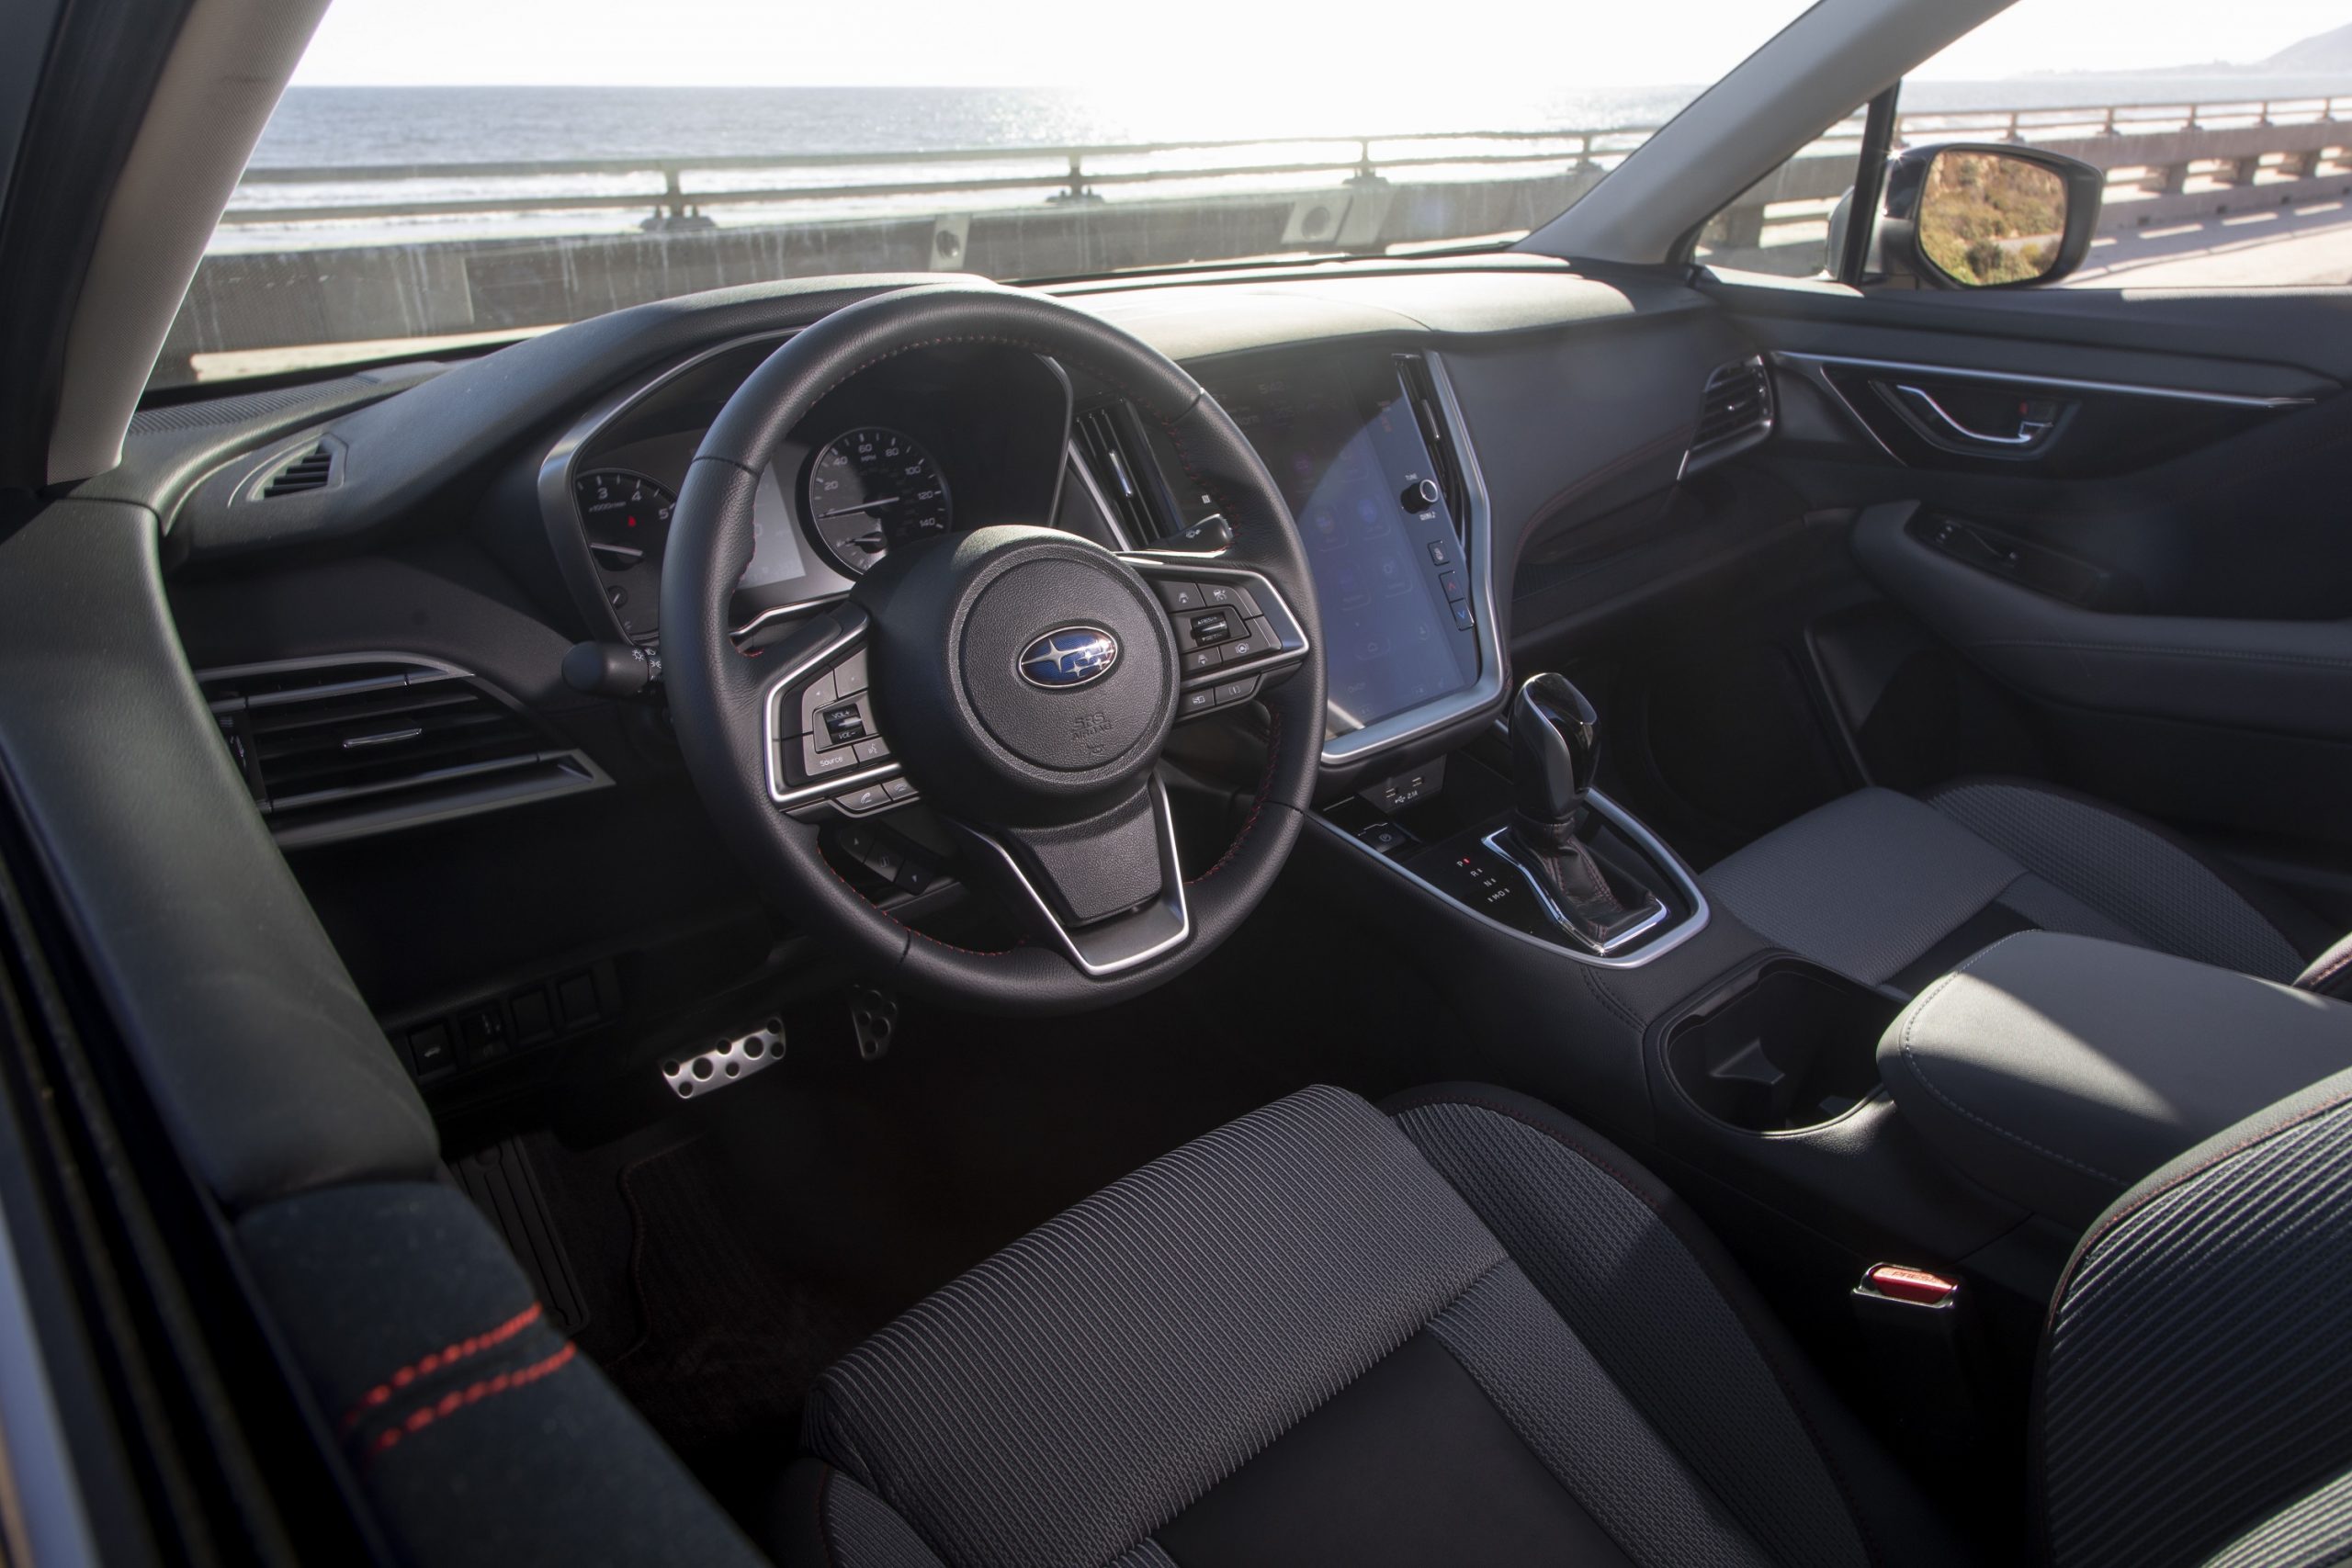 The interior of the 2022 Subaru Legacy featuring the brand's updated infotainment system